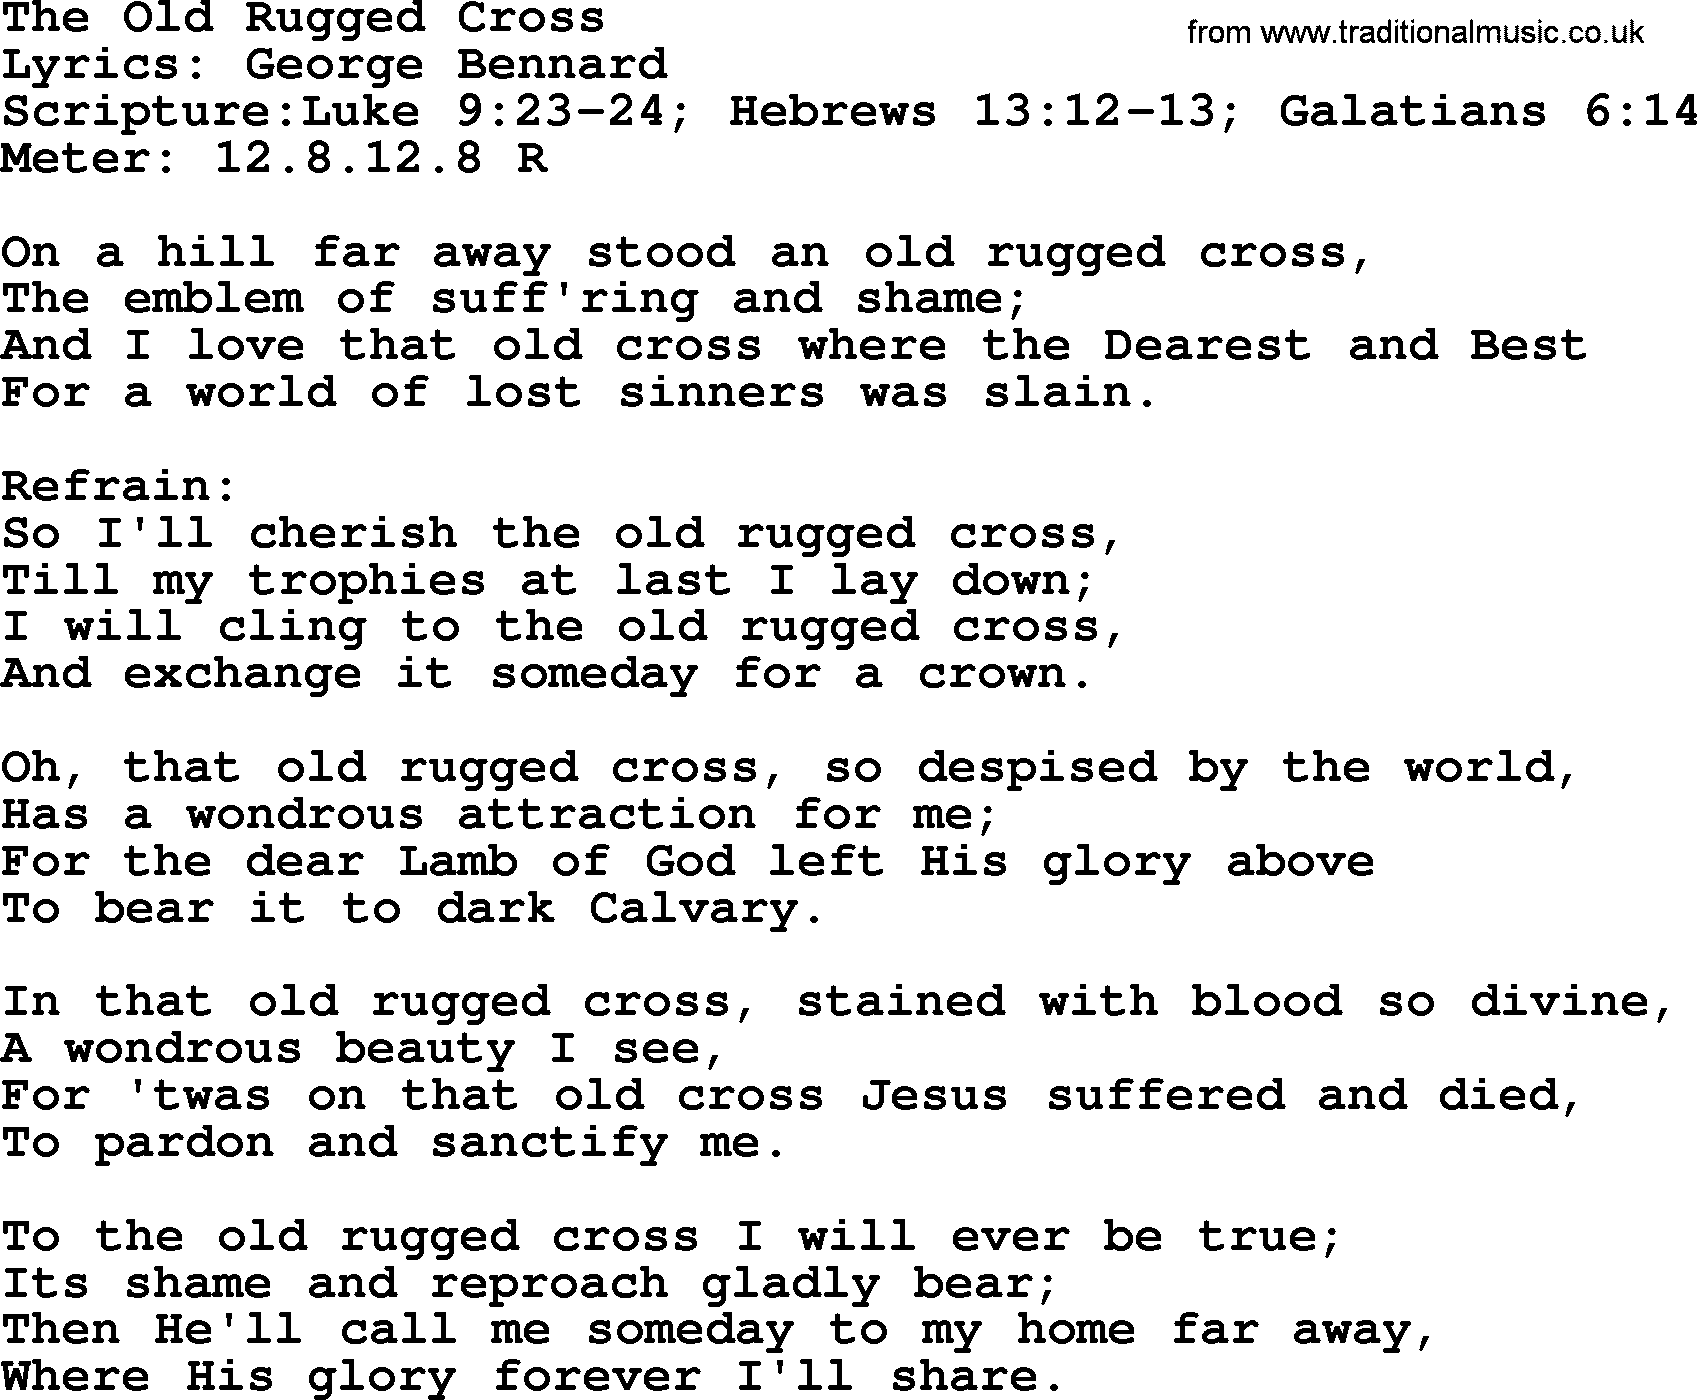 Most Popular Church Hymns and Songs The Old Rugged Cross Lyrics, PPTX and PDF